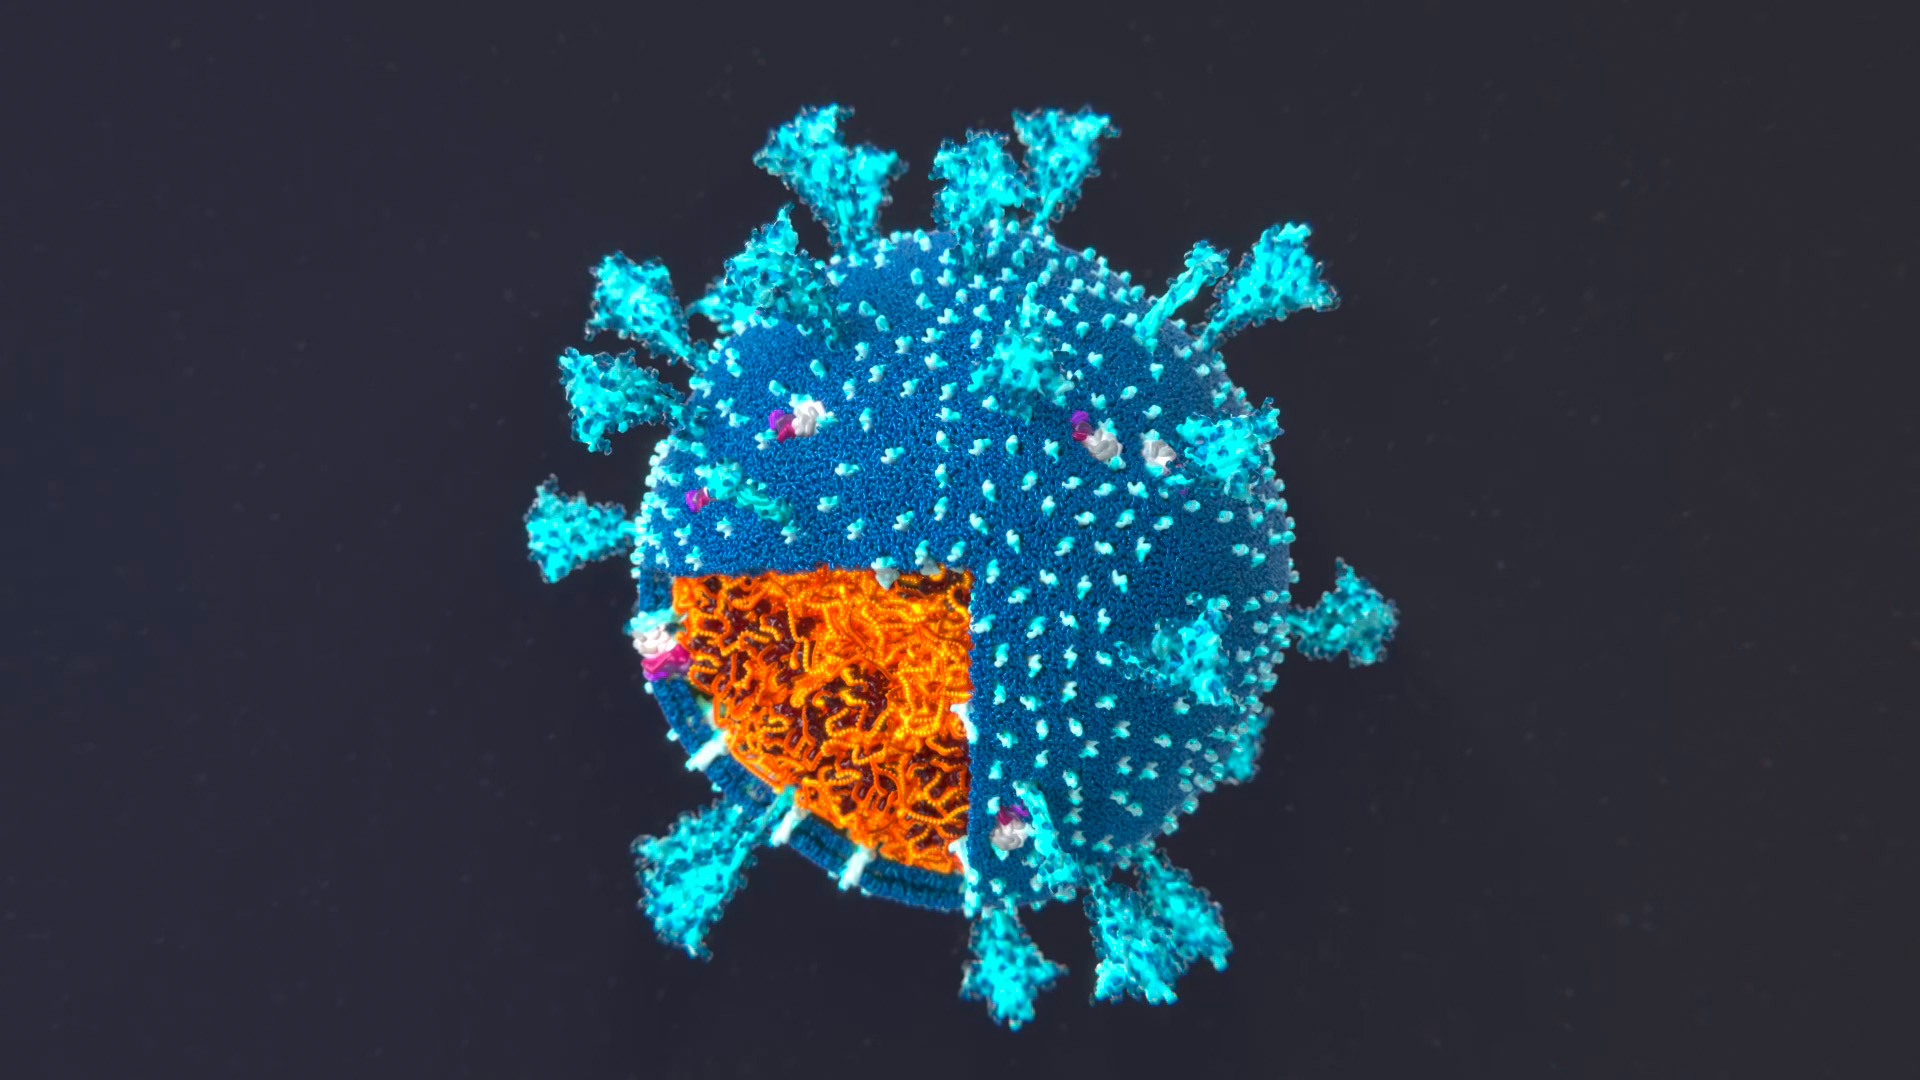 3D model of a SARS-CoV-2 virion, a cutaway section reveals the tightly packed RNA in the interior of the capsid.